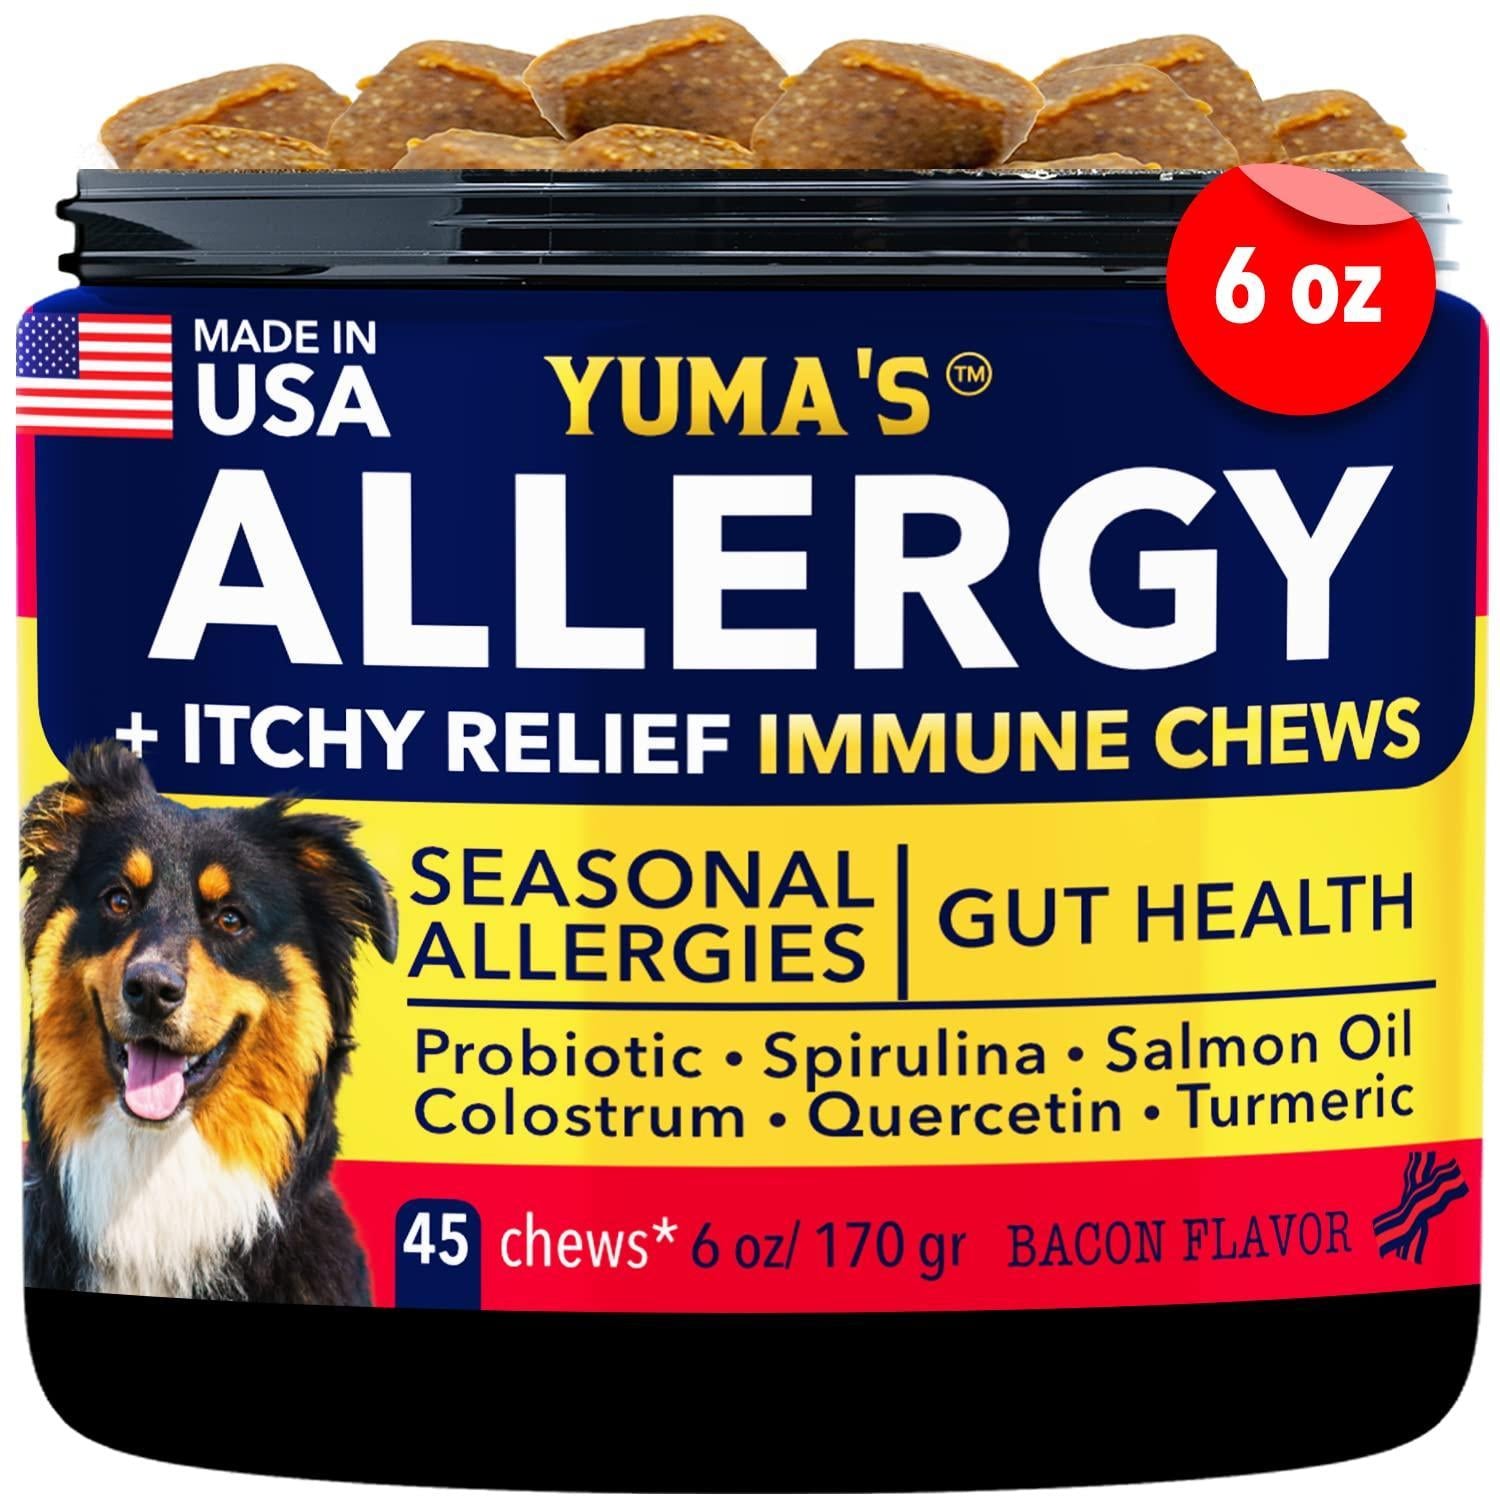 YUMA'S Dog Allergy Chews   Itch Relief for Dogs   Dog Allergy Relief   Anti Itch for Dogs   Dog Itchy Skin   Dog Allergy Support   Hot Spots   Immune Health Supplement   Made in USA